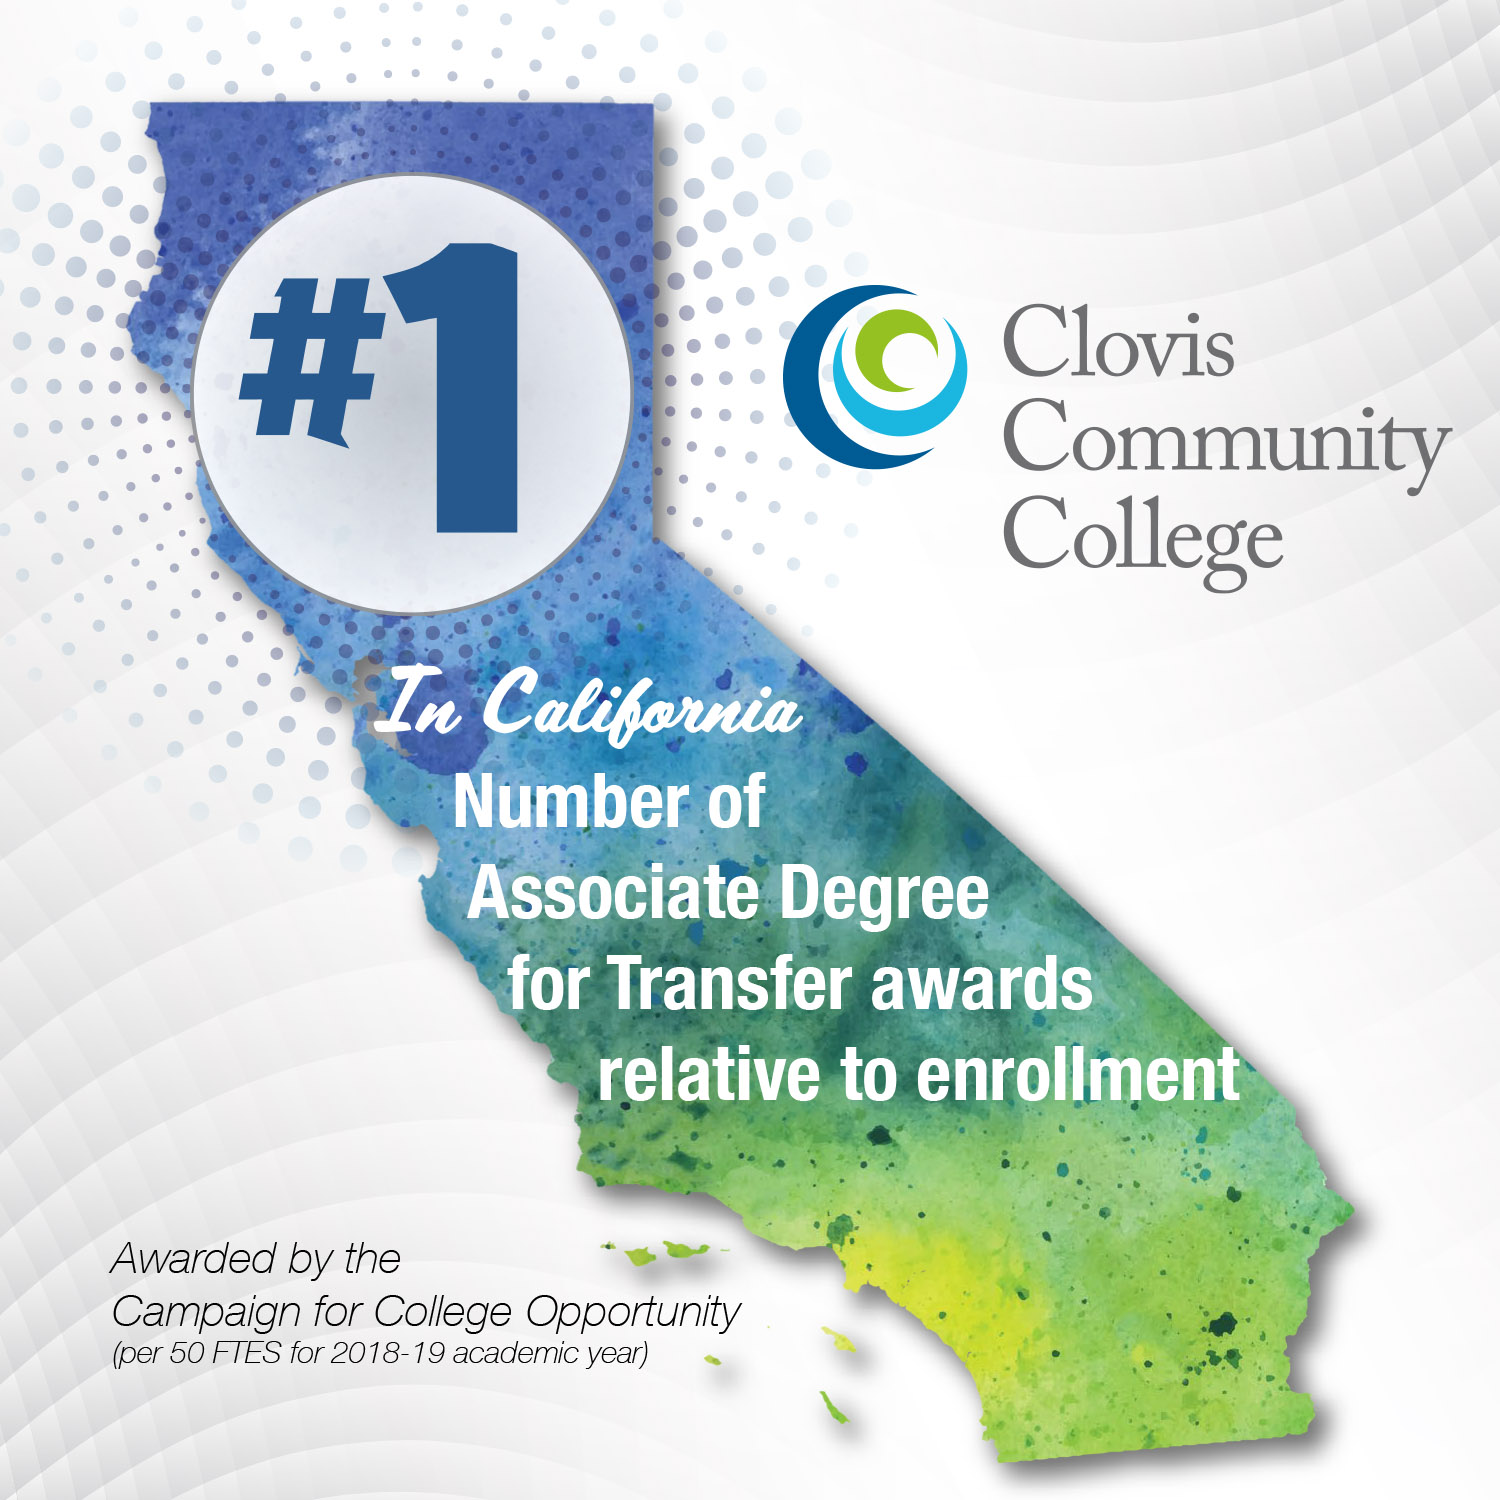 Number one in California of Associate Degree for Transfer Awards relative to enrollment. Awarded by the Campaihn for College Opportuniy